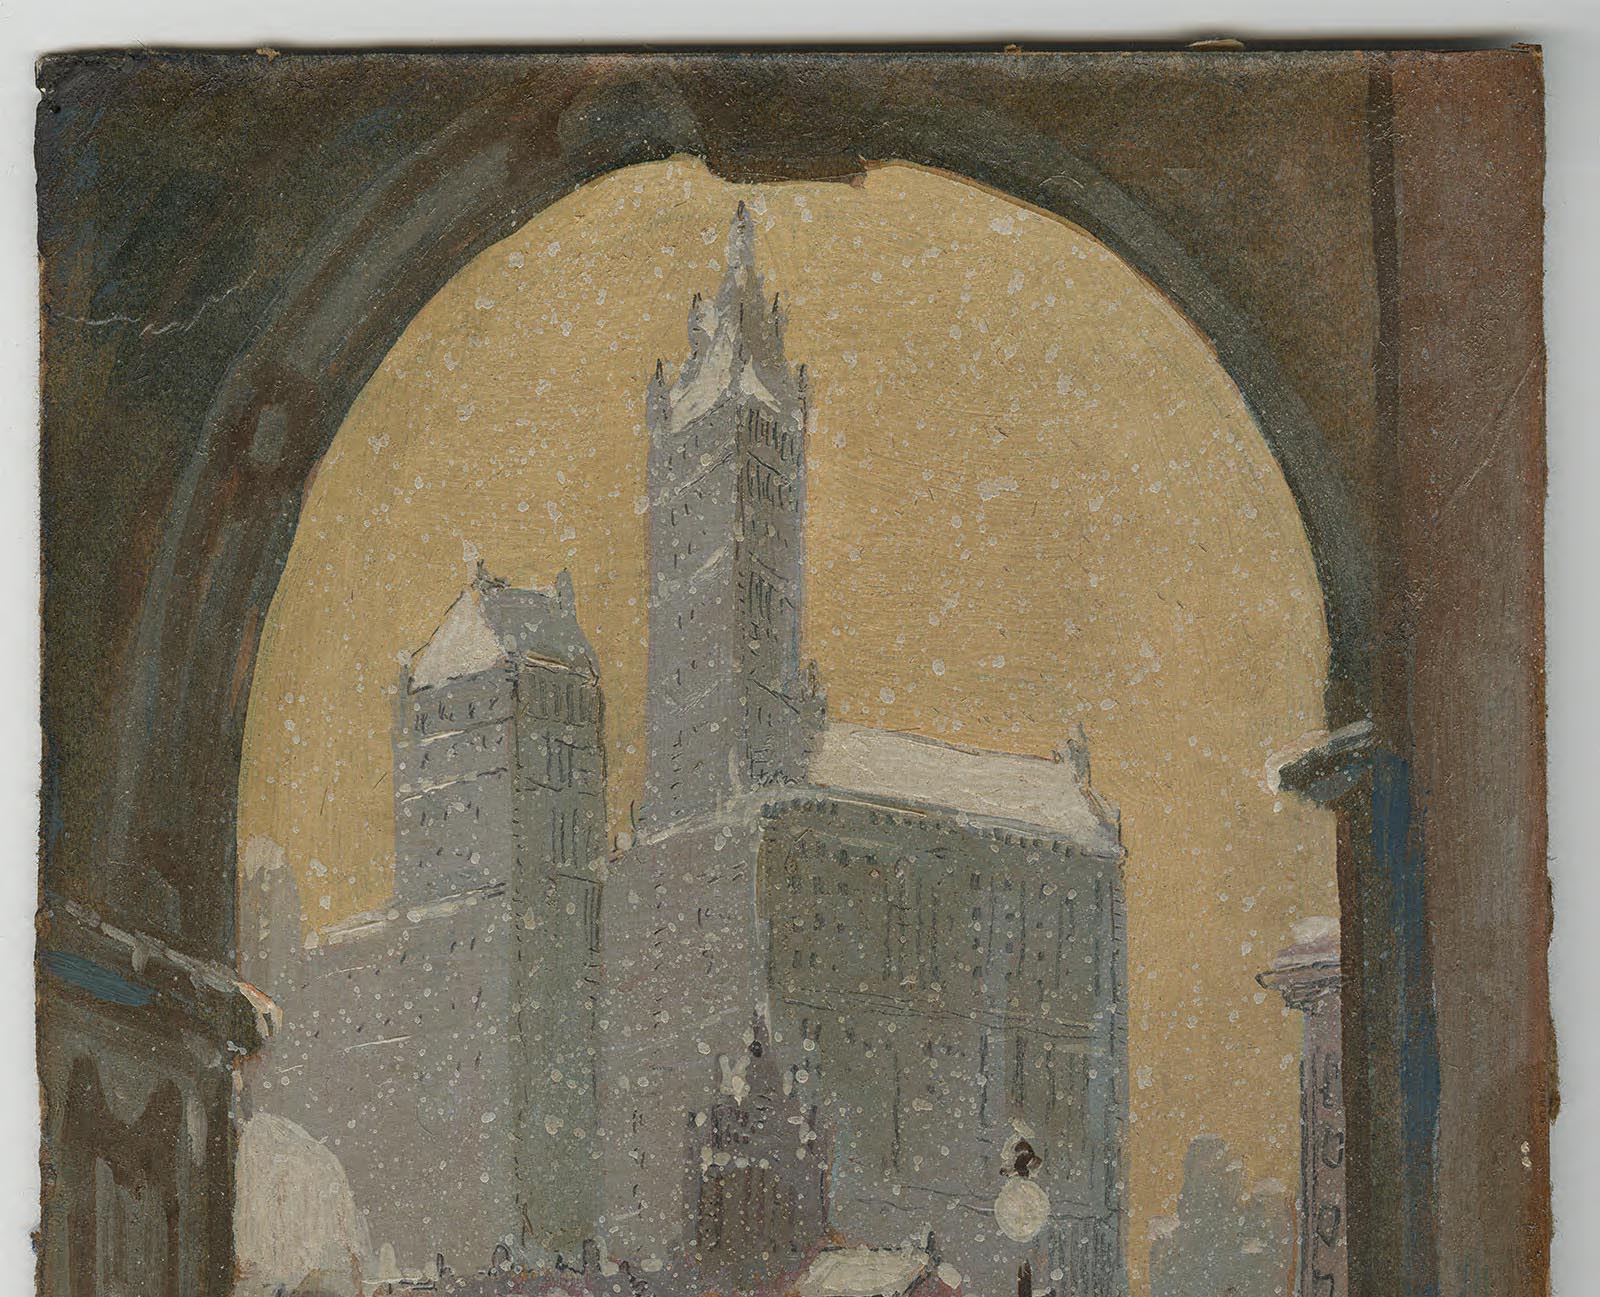 Image is 1913 painting of the Woolworth Building in winter 